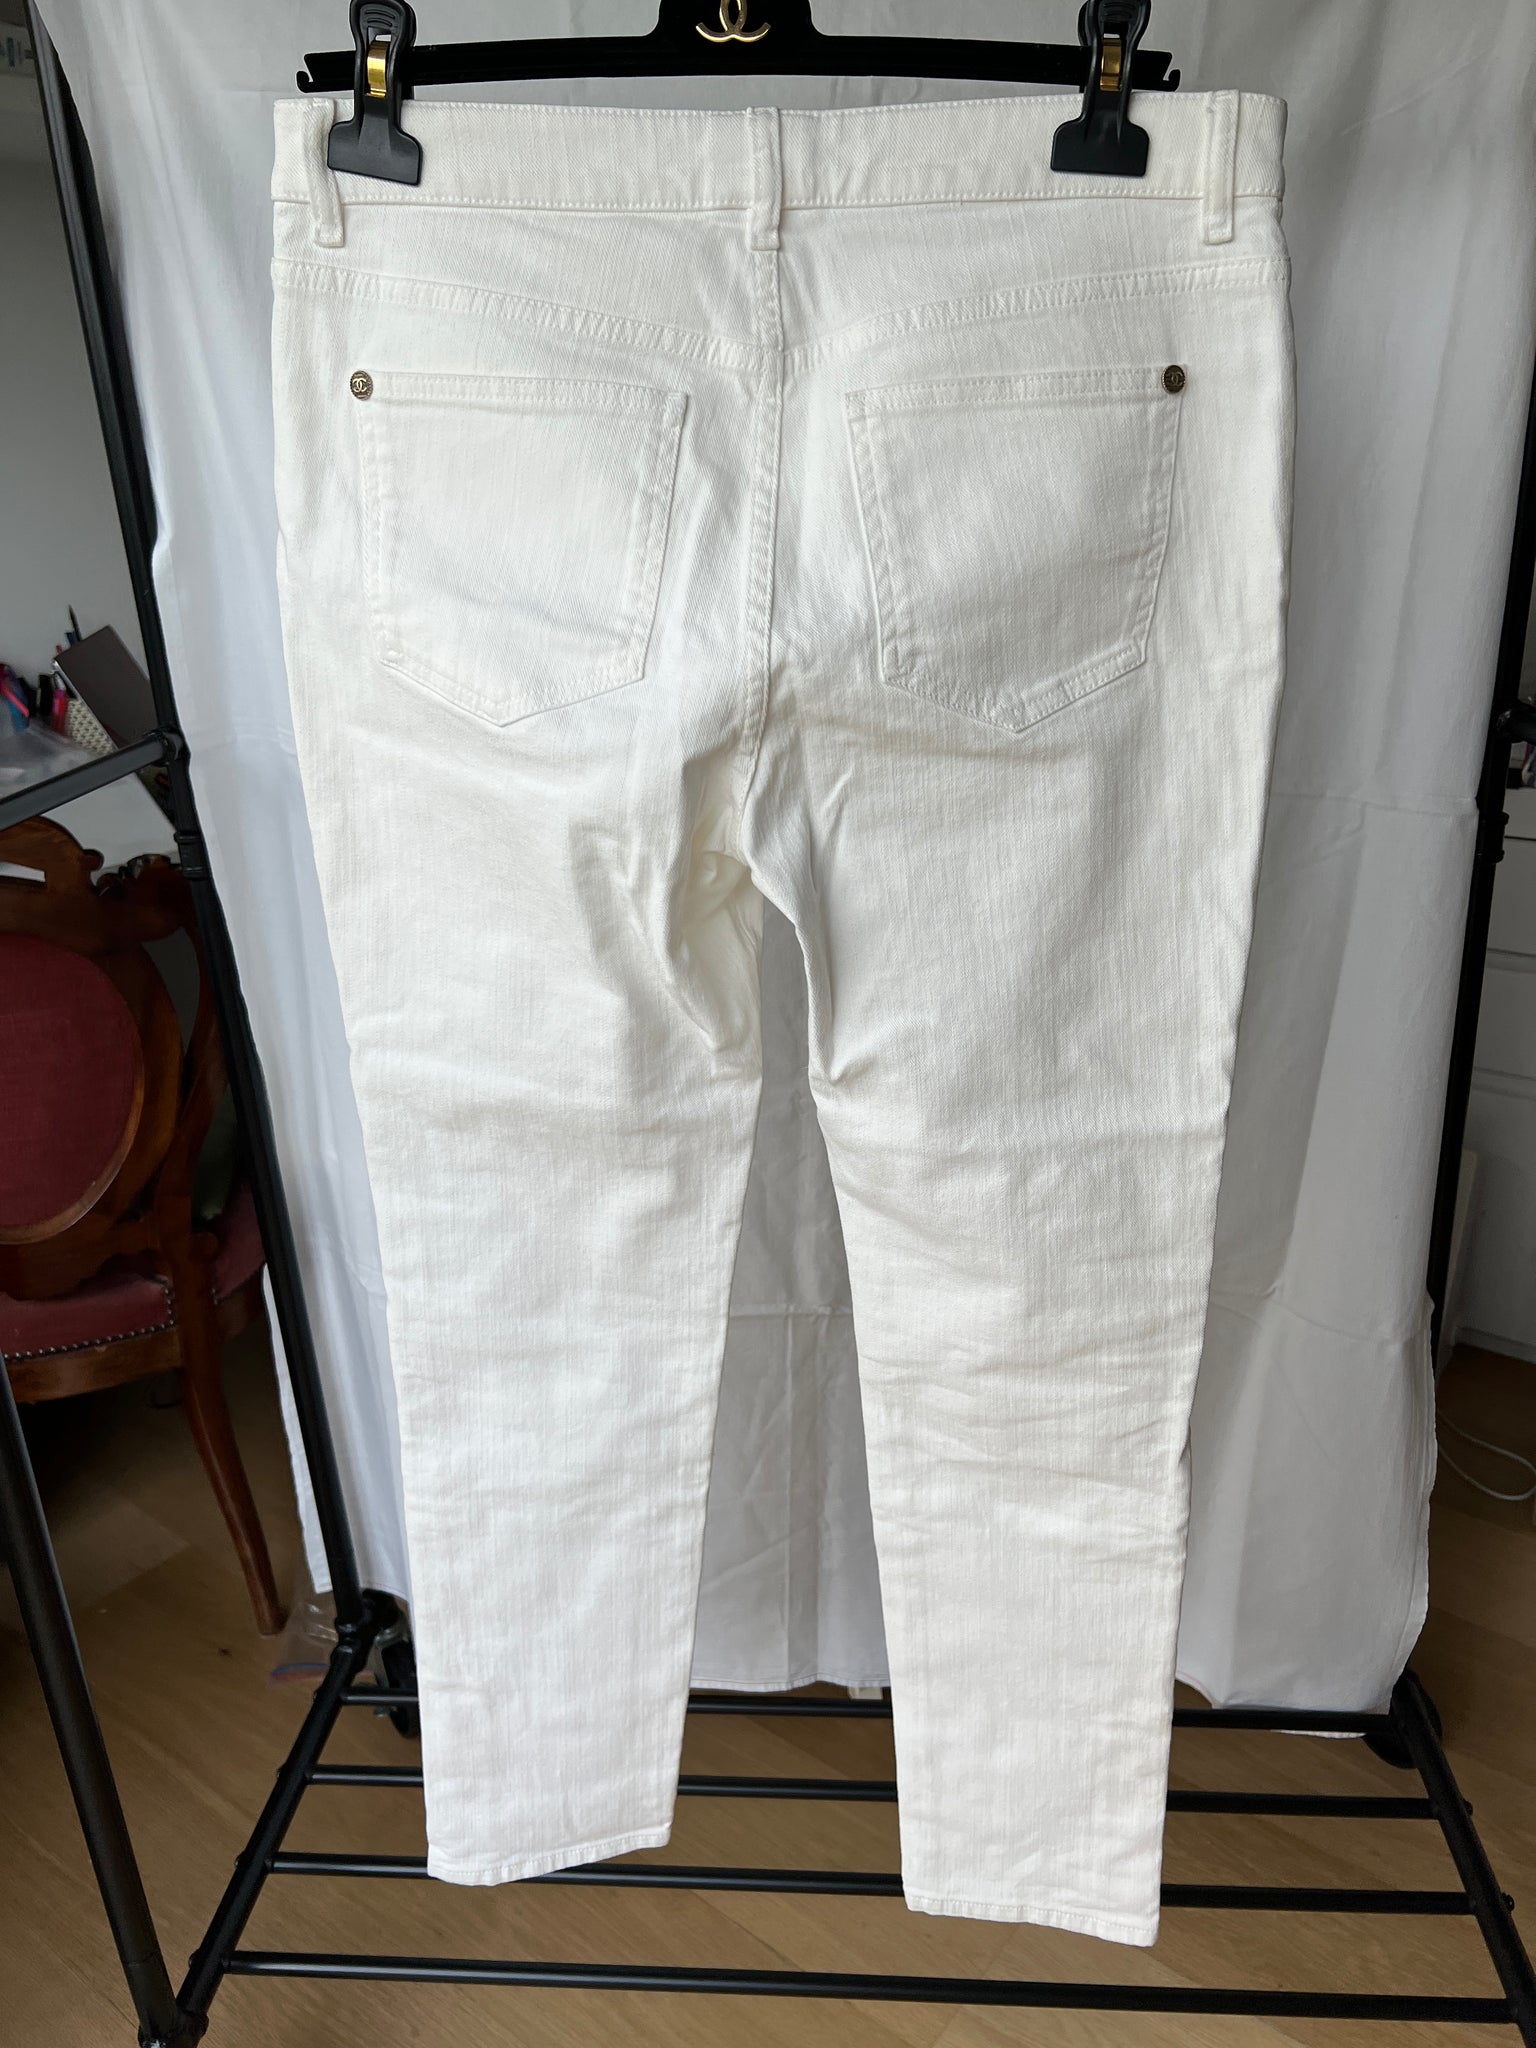 Chanel White Jeans in Size 42 - Lou's Closet